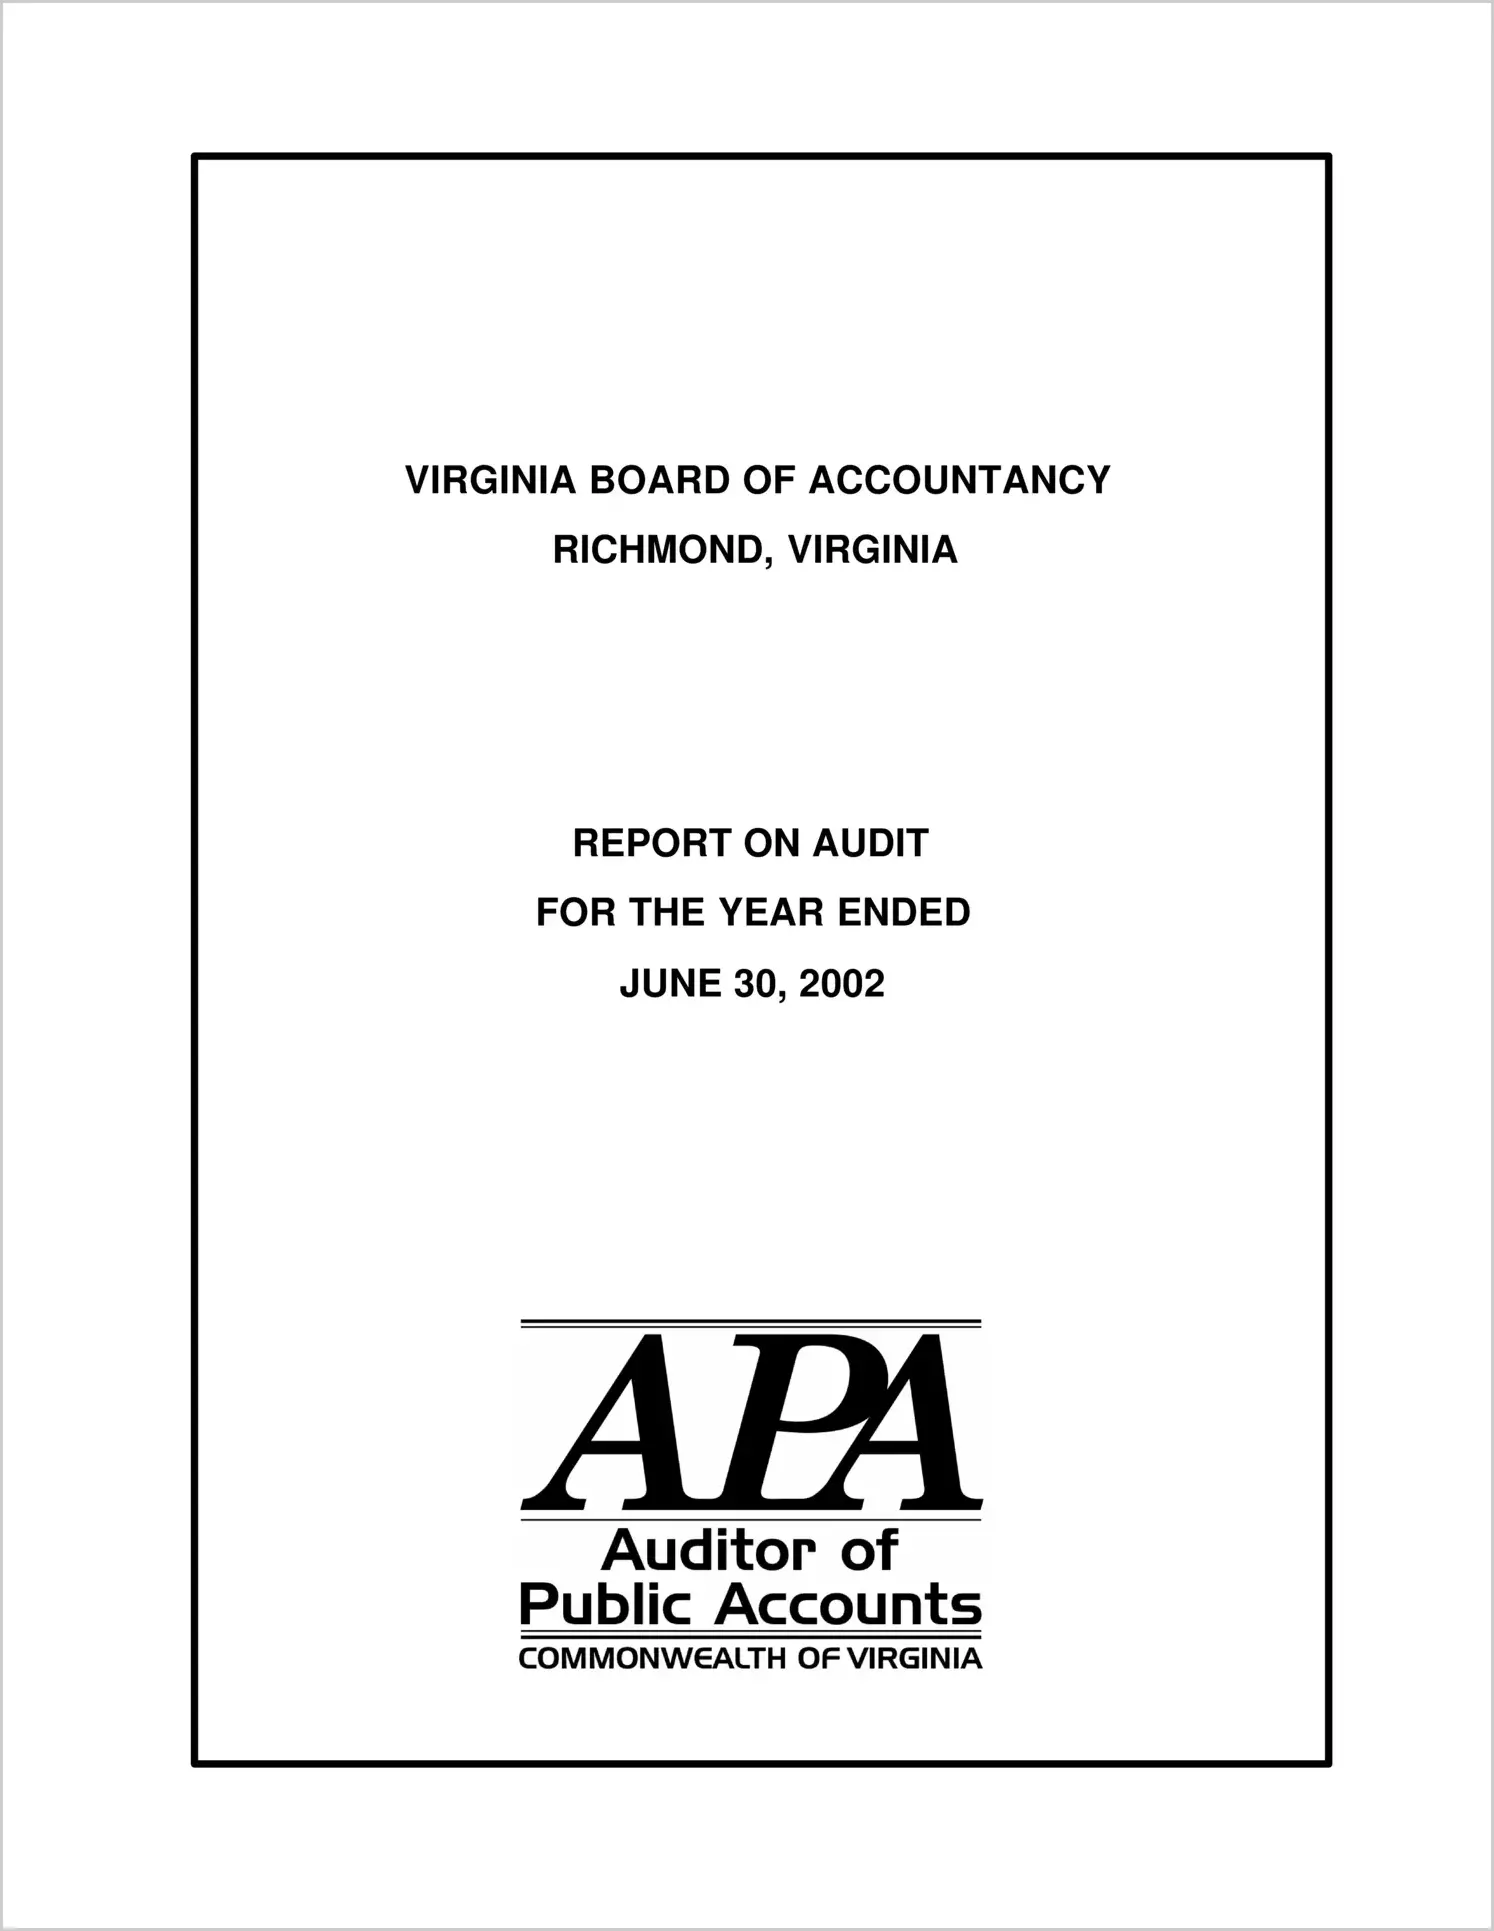 Virginia Board of Accountancy for the year ended June 30, 2002